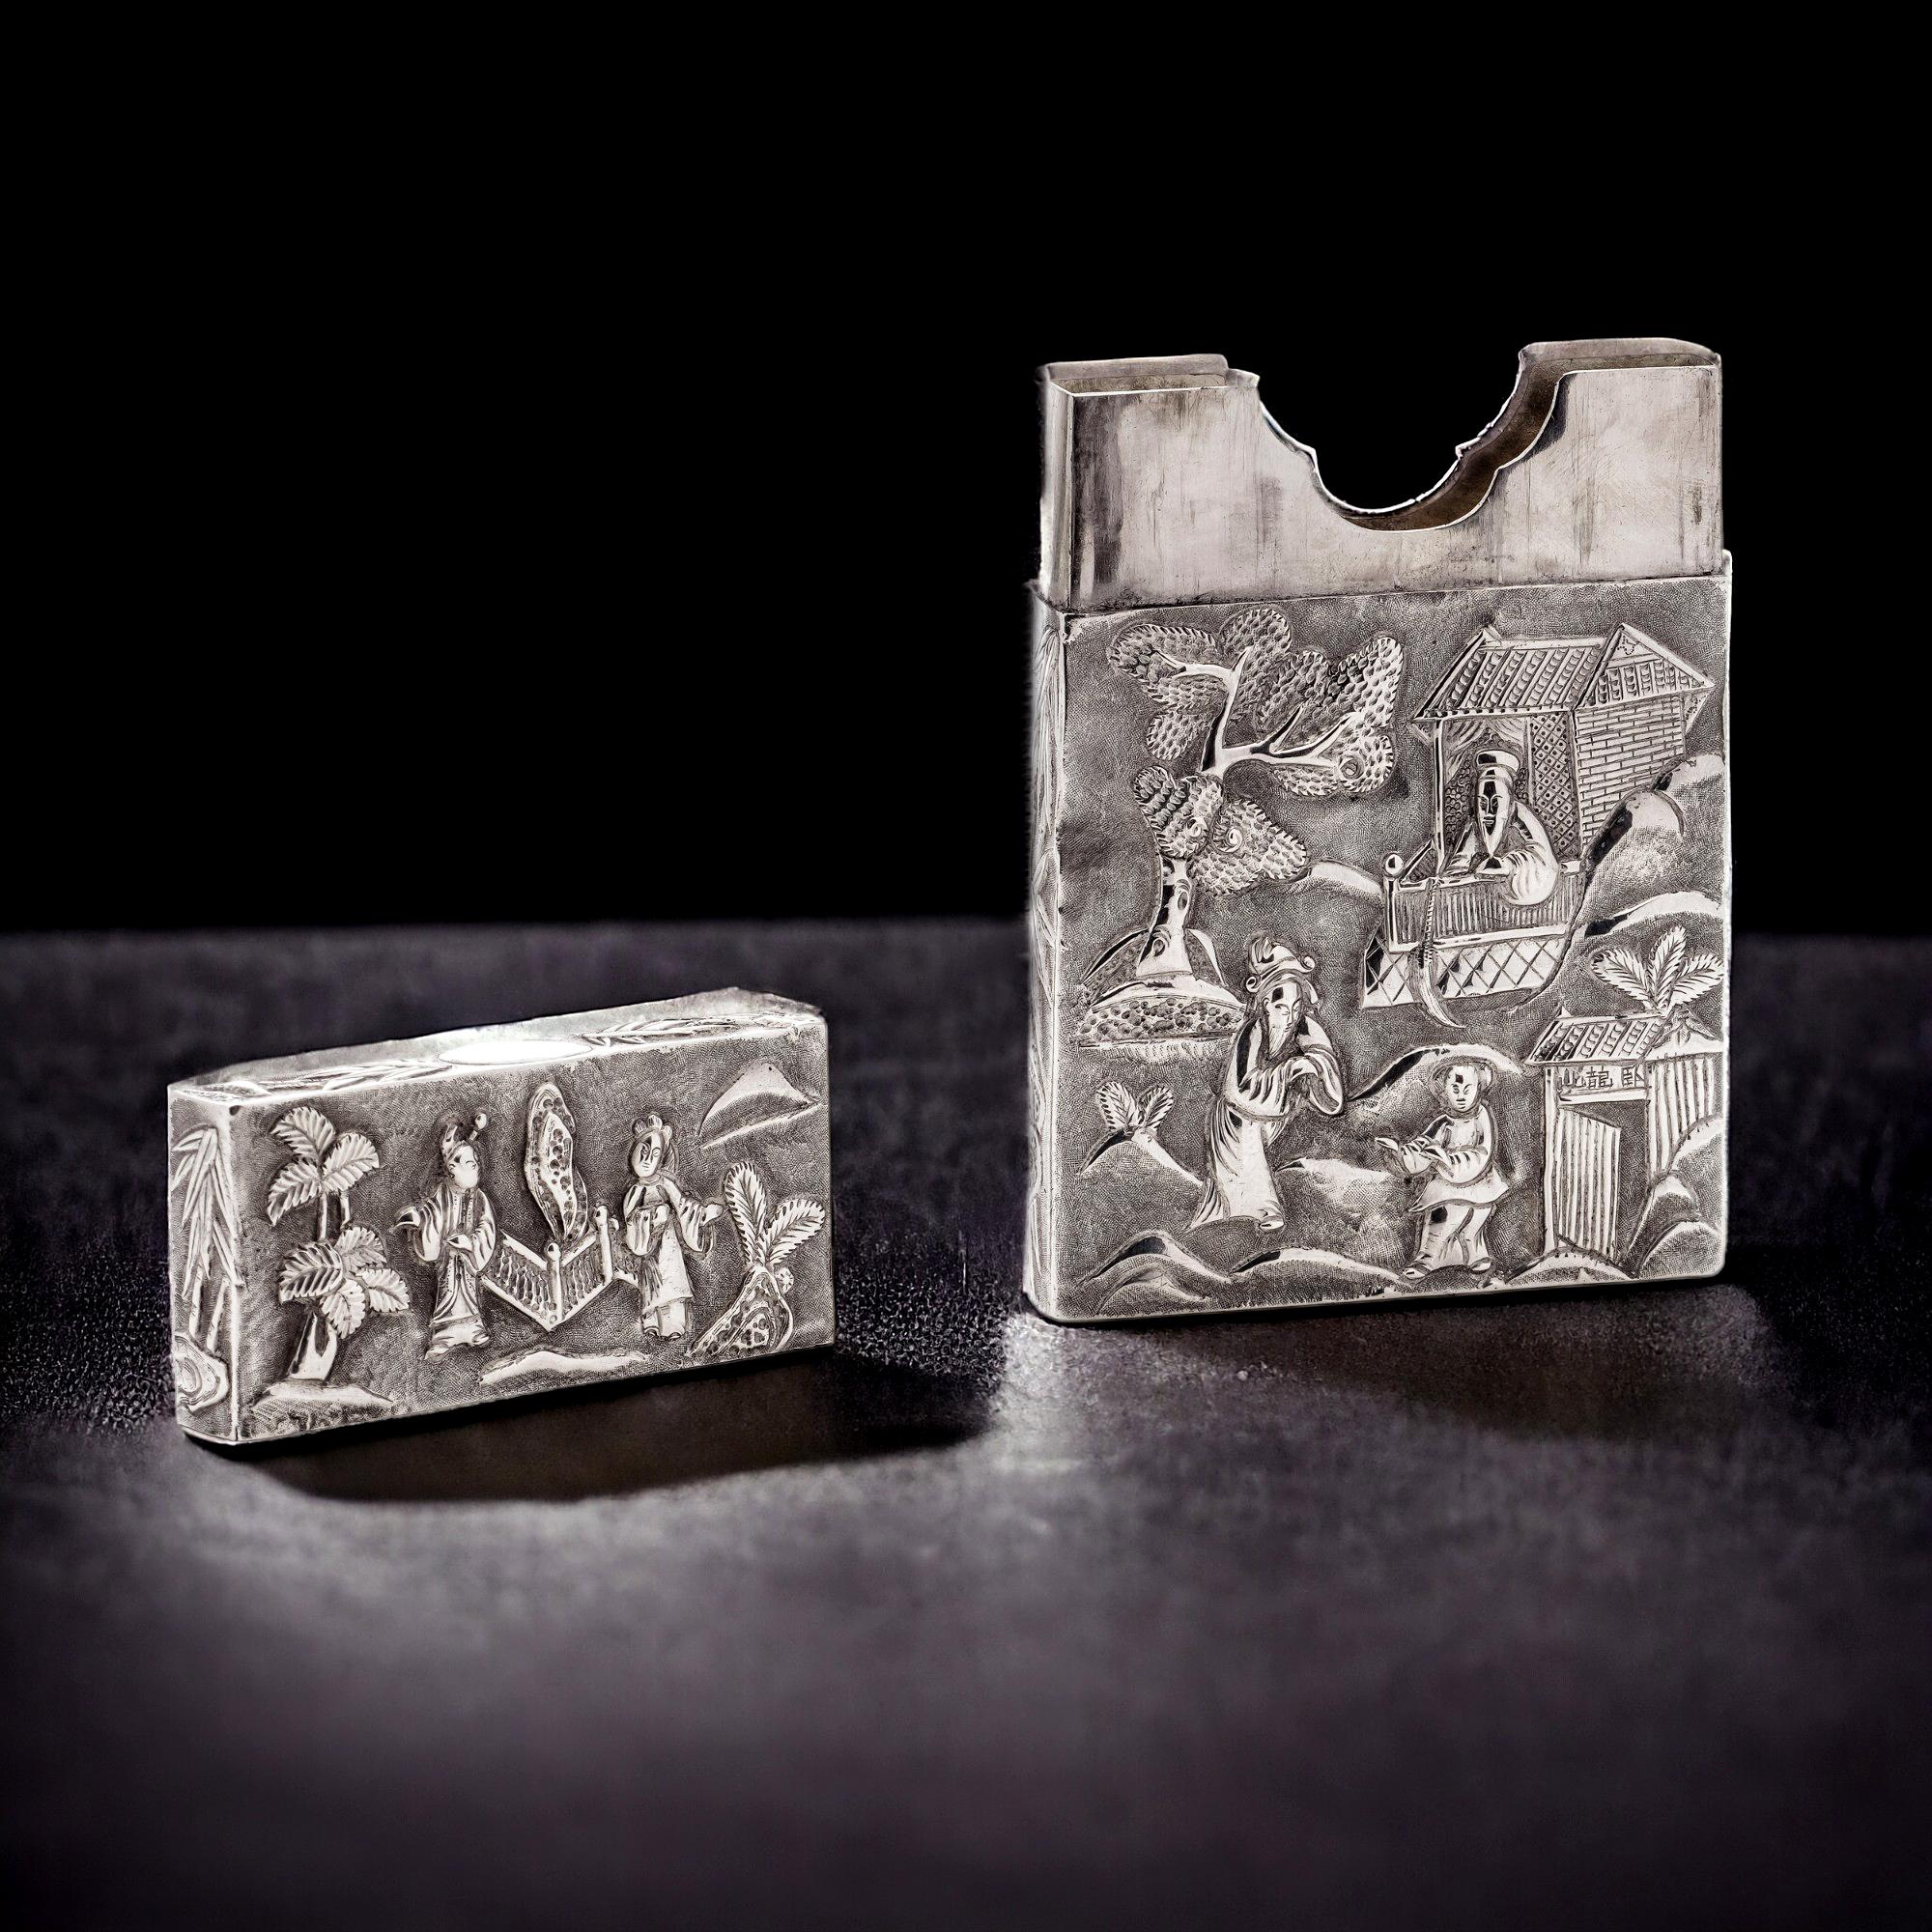 Antique Chinese export silver card case adorned with courtly scene and pagoda decoration. 
Made in China, Circa 1860's 
Stamped with maker's mark CUT. 
X - Ray tested positive for 900. silver. 

Dimensions -
Height: 9.1 cm 
Width: 6.1 cm 
Weight: